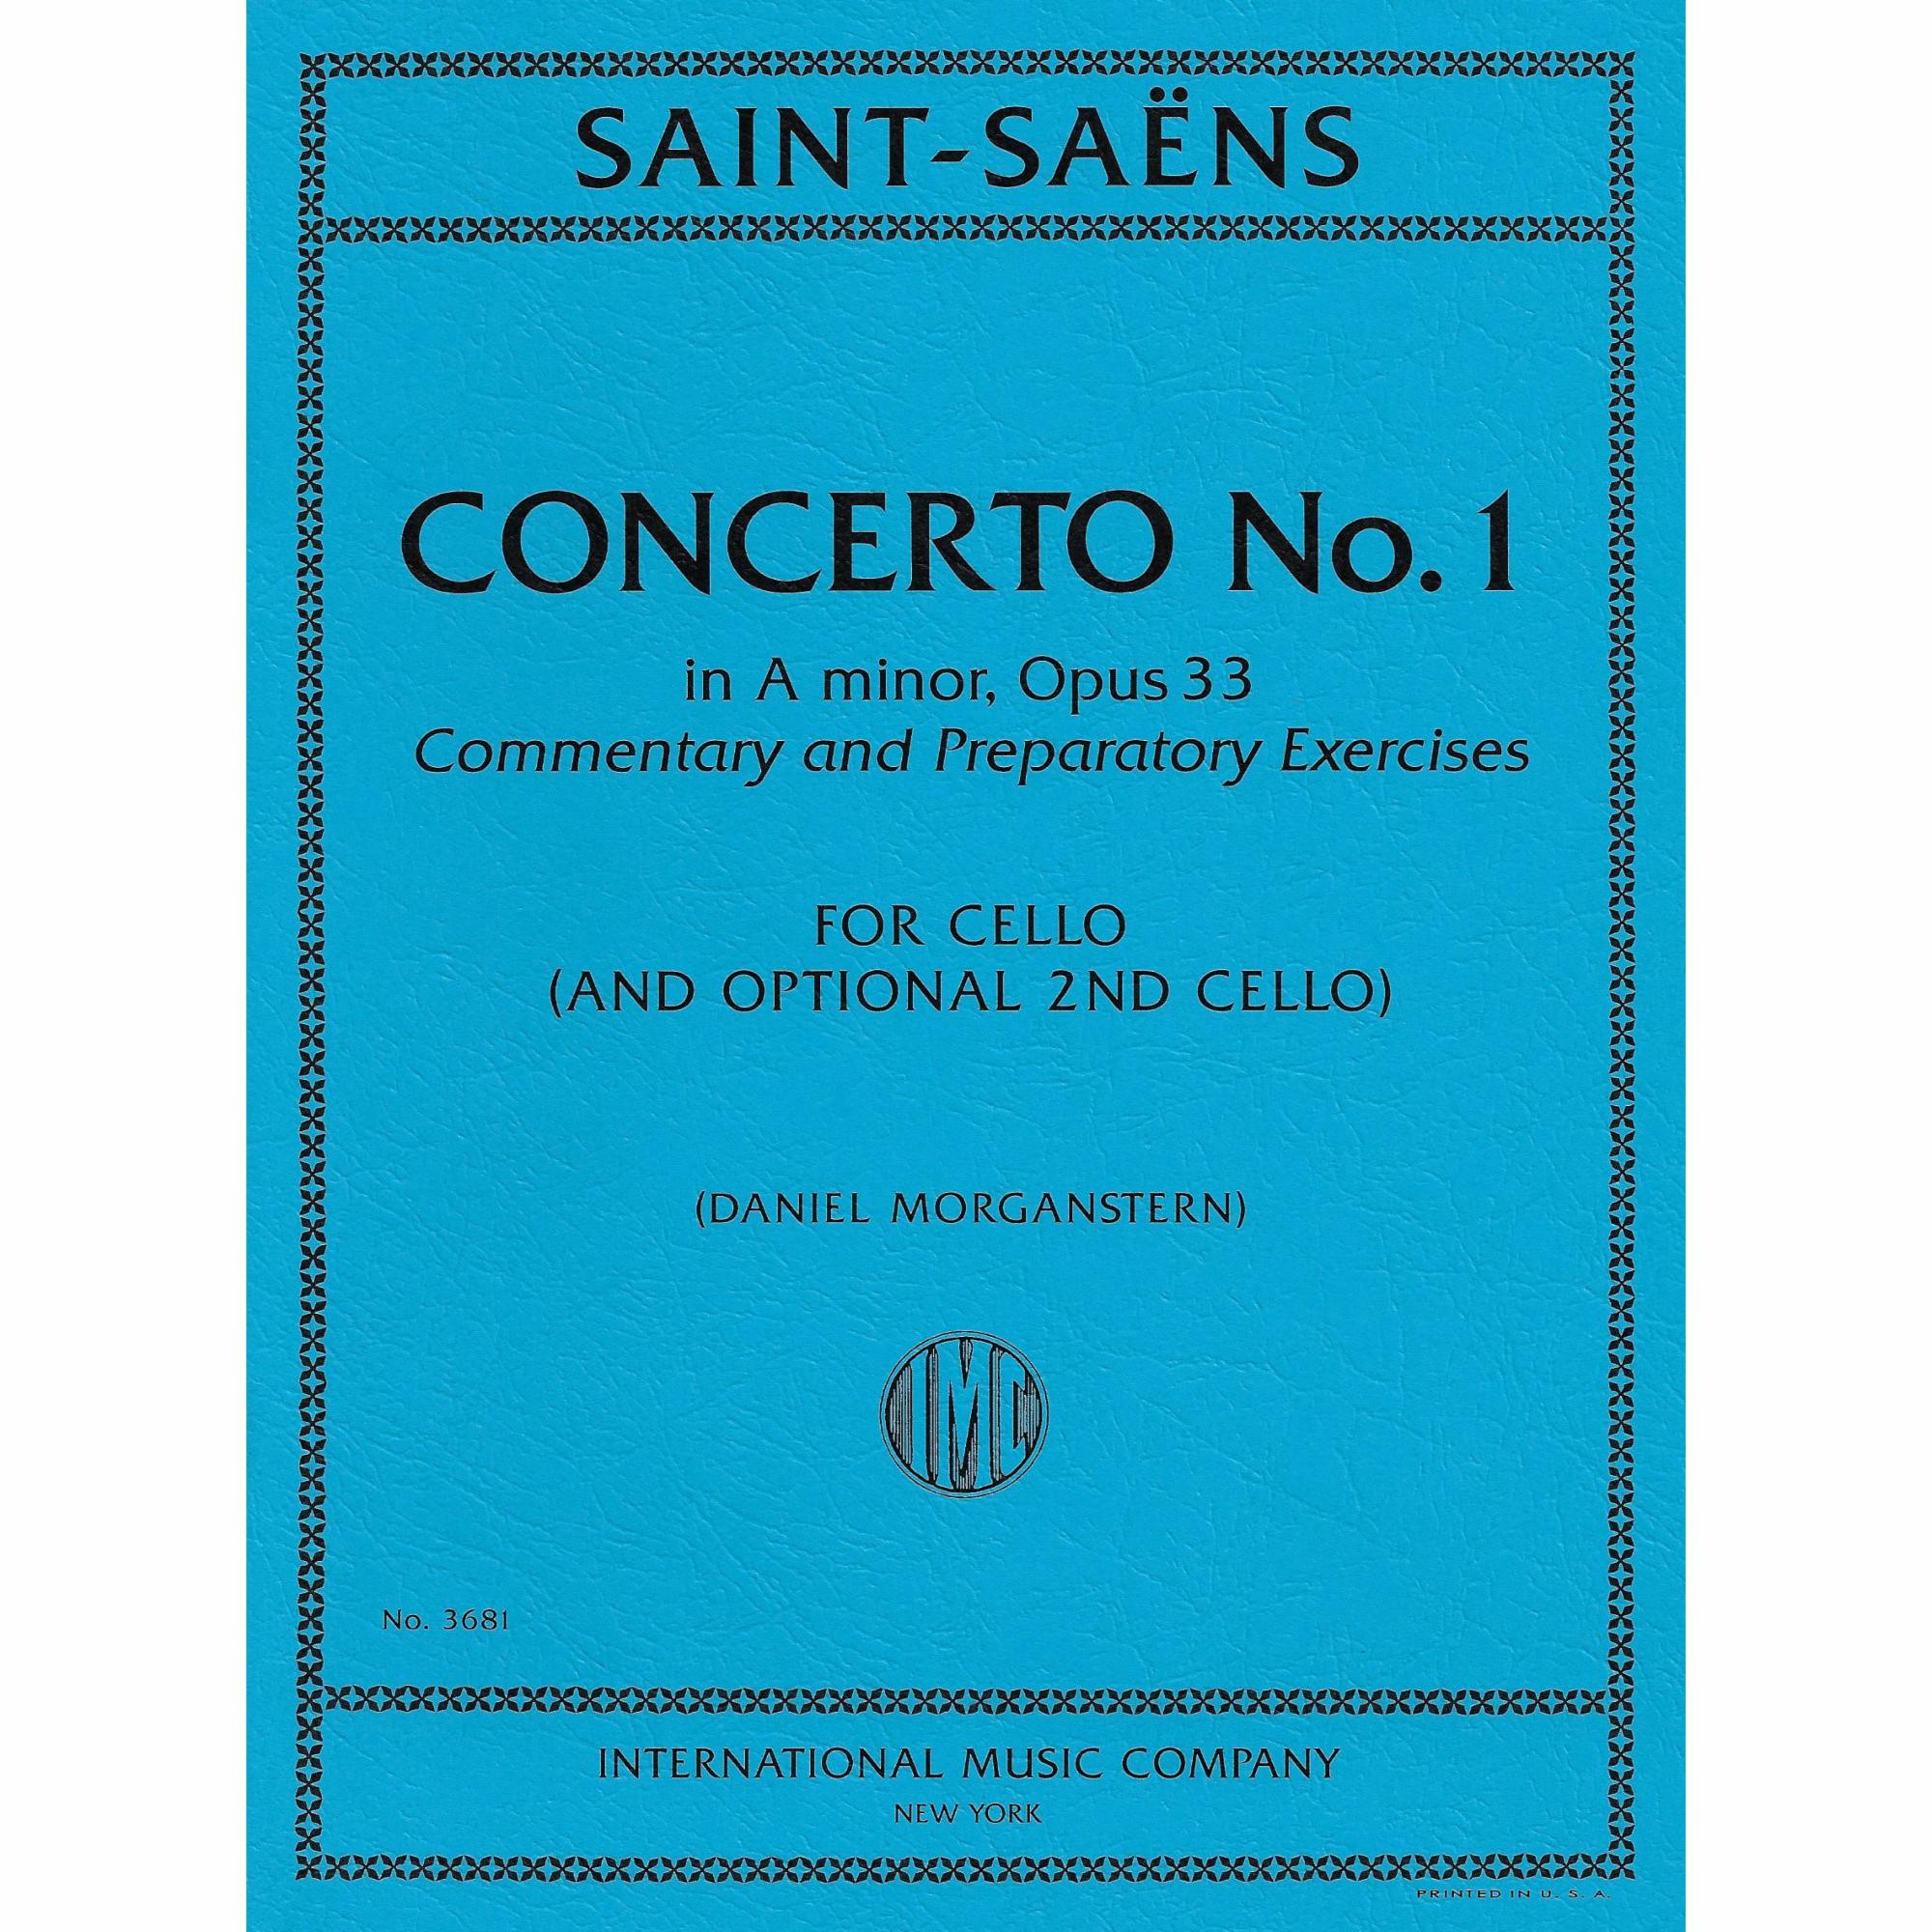 Saint-Saens -- Concerto No. 1 in A minor, Op. 33 for Two Cellos